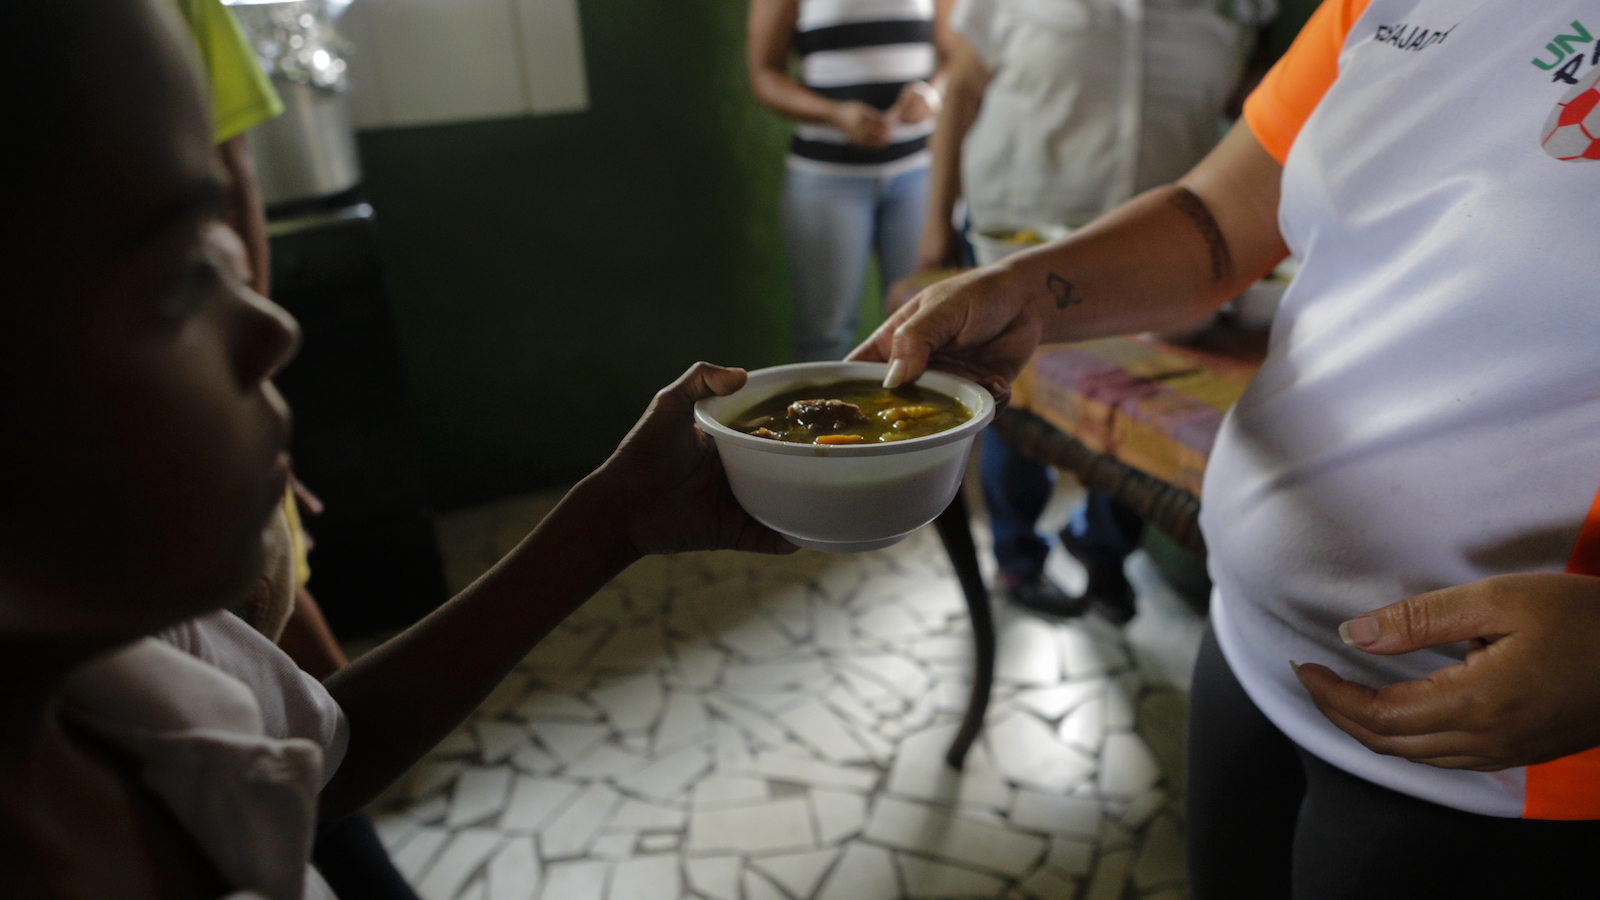 A woman hands a bowl of food to a child.